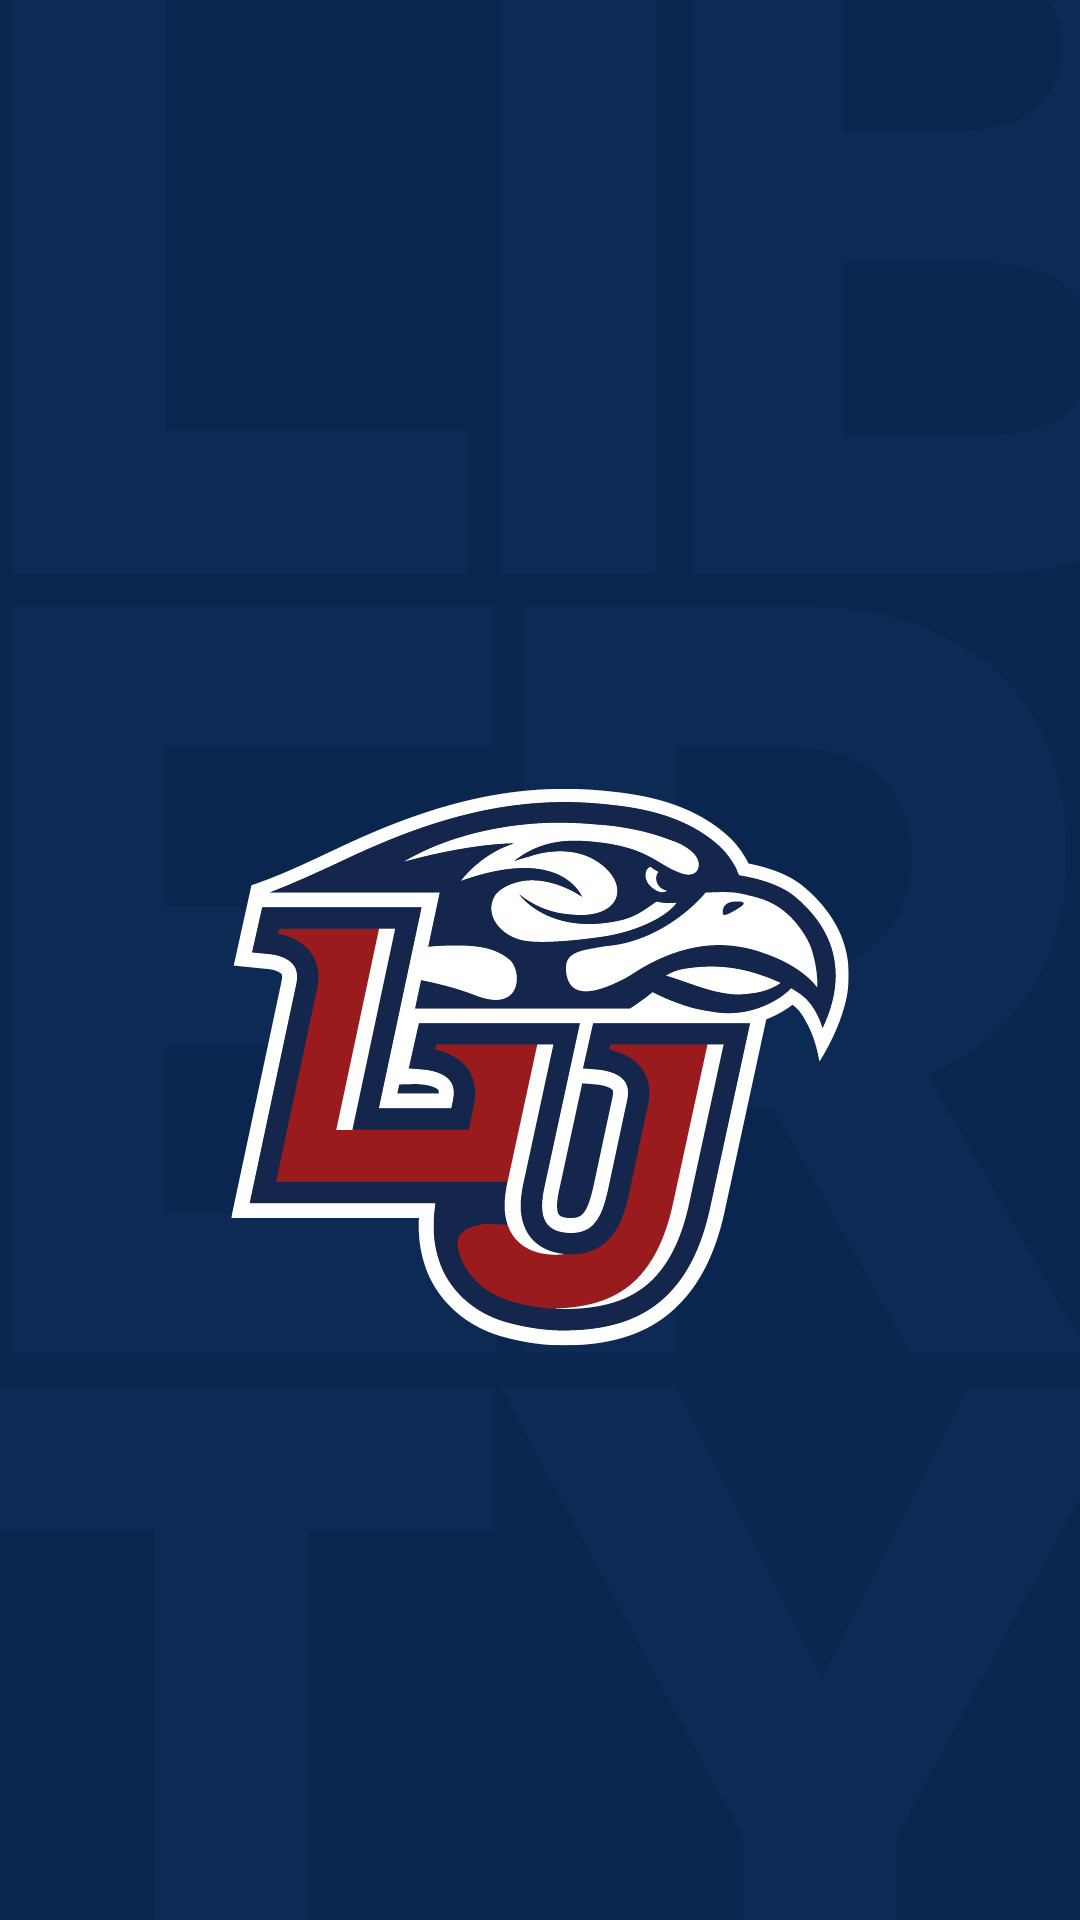 1080x1920 Liberty University Mobile Wallpapers and Backgrounds Liberty University  Mobile Wallpapers and Backgrounds ...